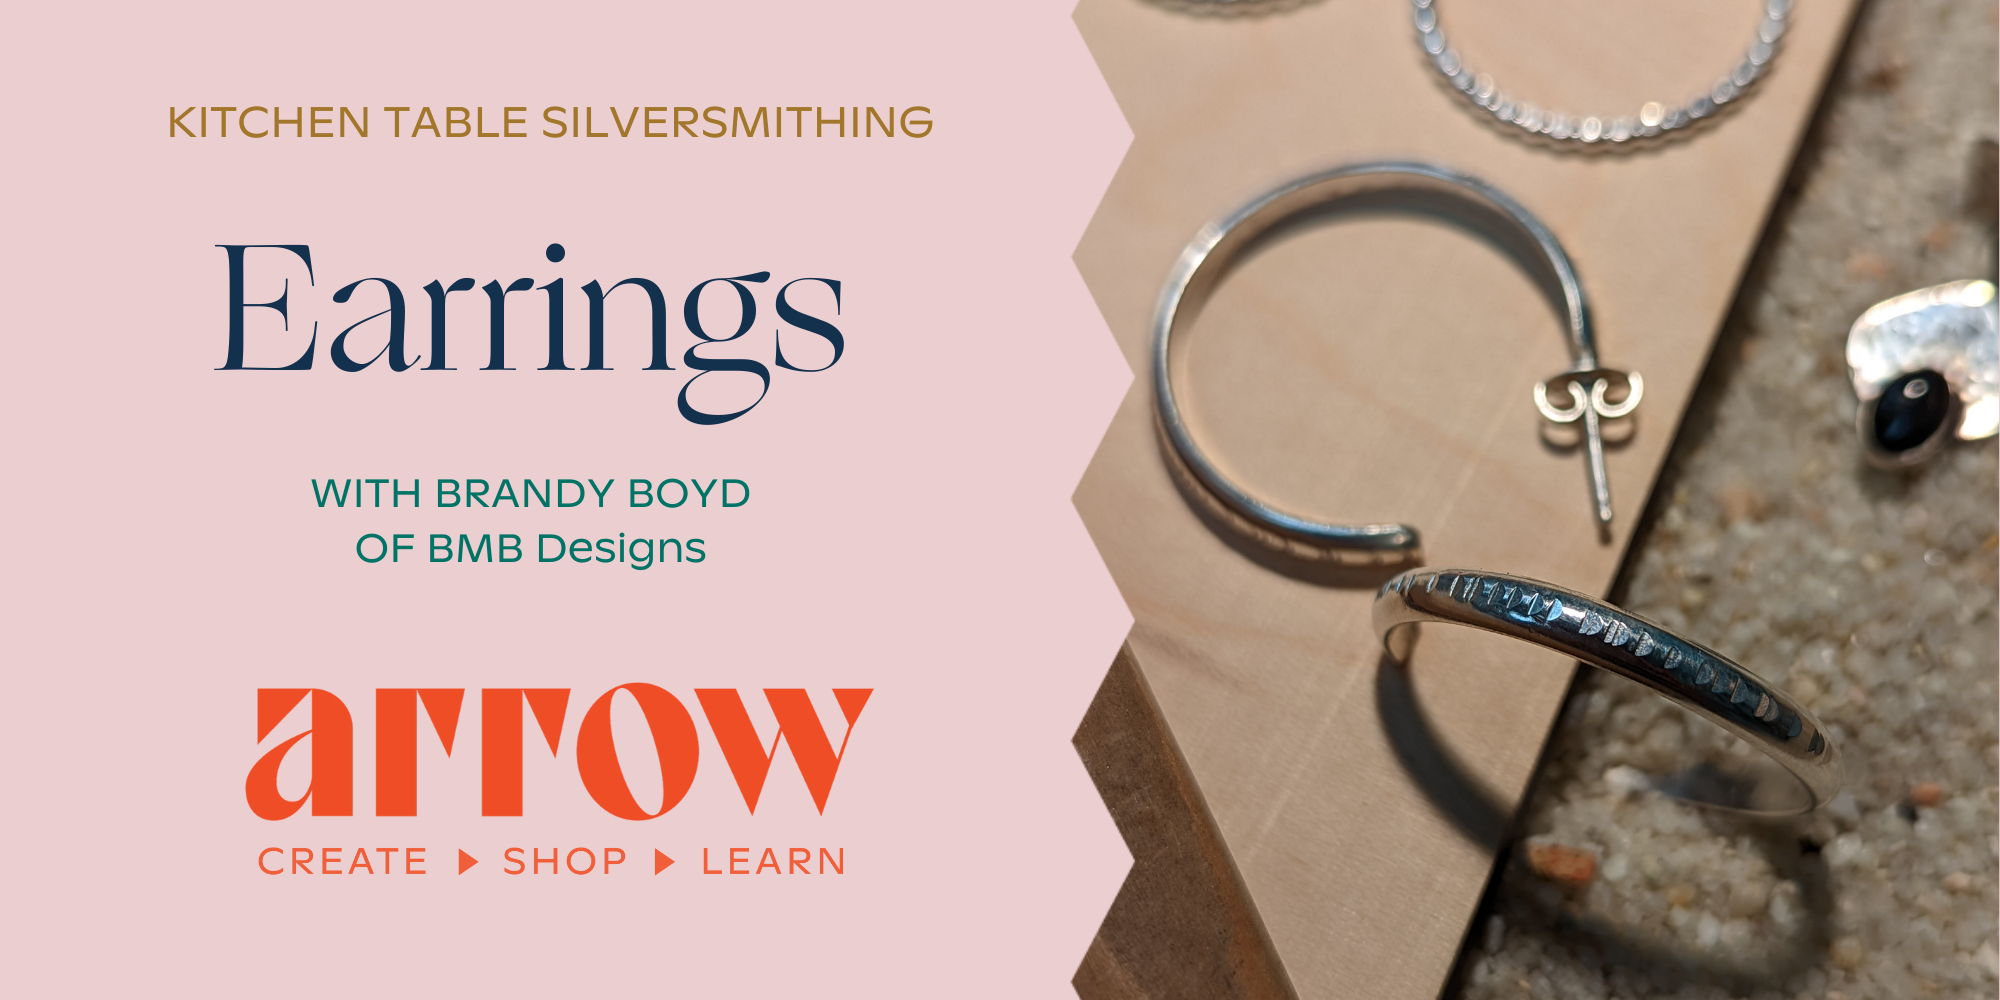 Kitchen Table Silversmithing: Earrings with BMB Designs - Powered By Arrow promotional image